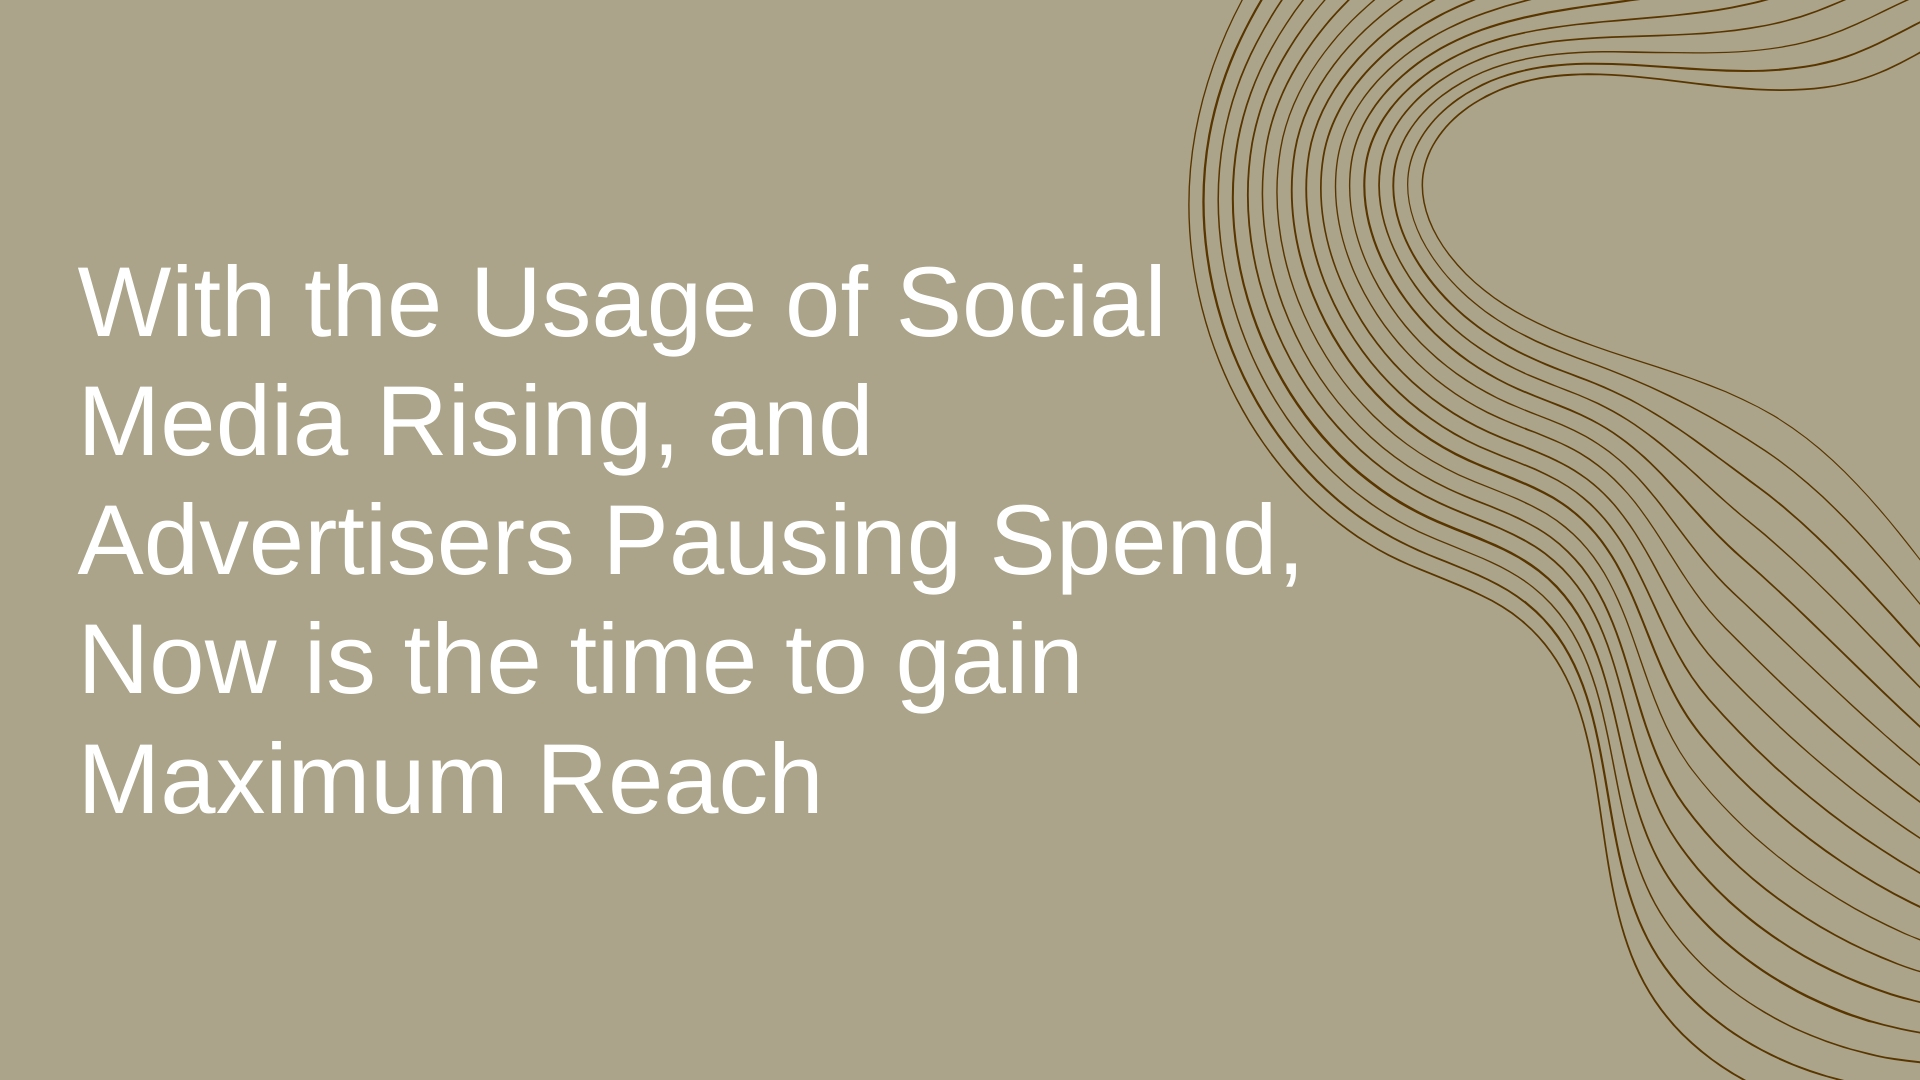 With the Usage of Social Media Rising, and Advertisers Pausing Spend, Now is the time to gain Maximum Reach